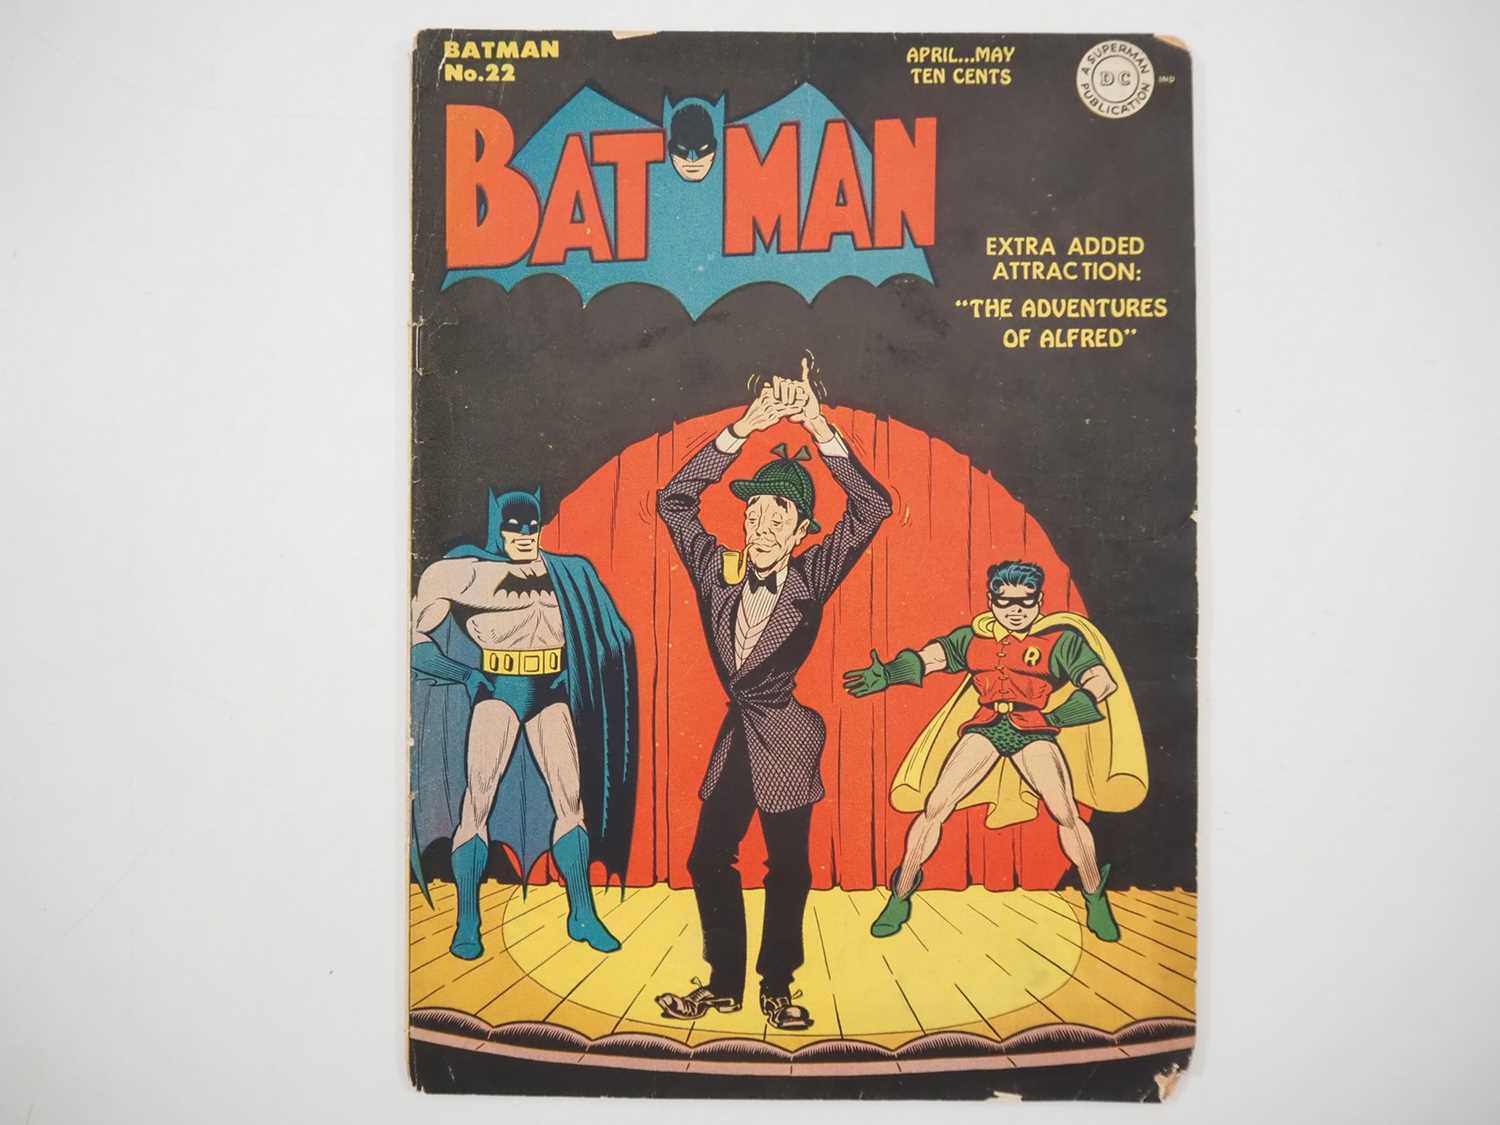 BATMAN #22 (1944 - DC) - First cover appearance and first solo story featuring Alfred - Dick